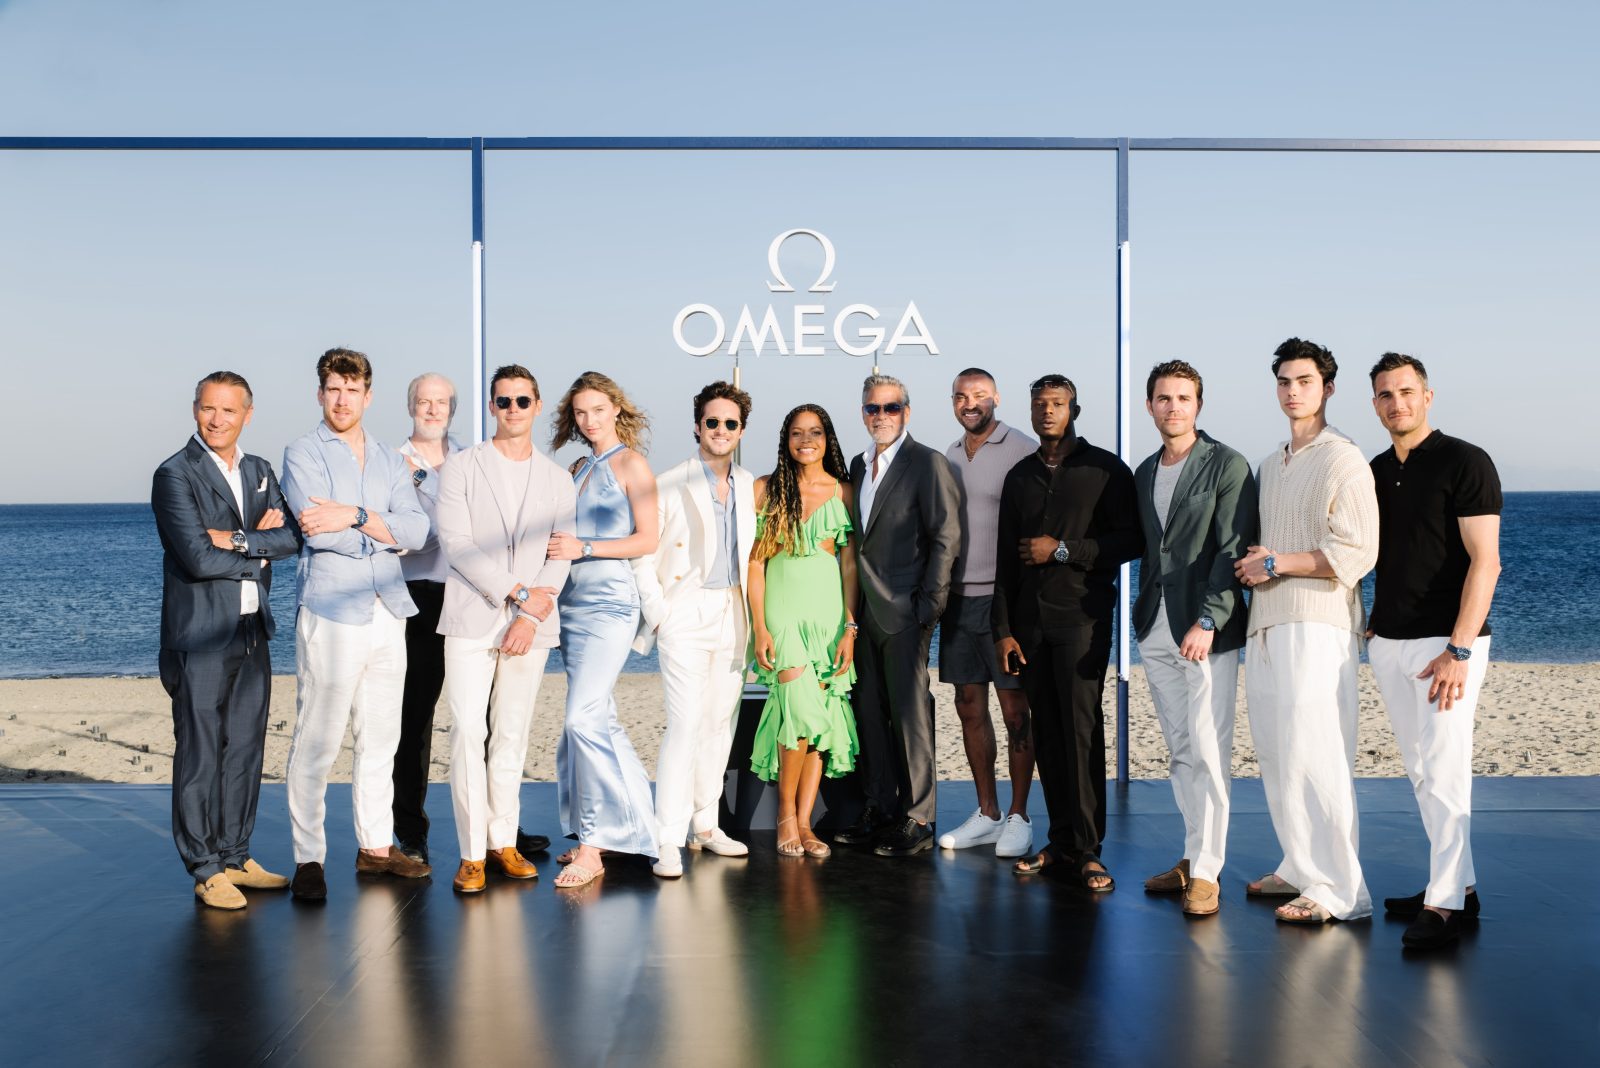 International fashion houses, a pole of attraction in Mykonos